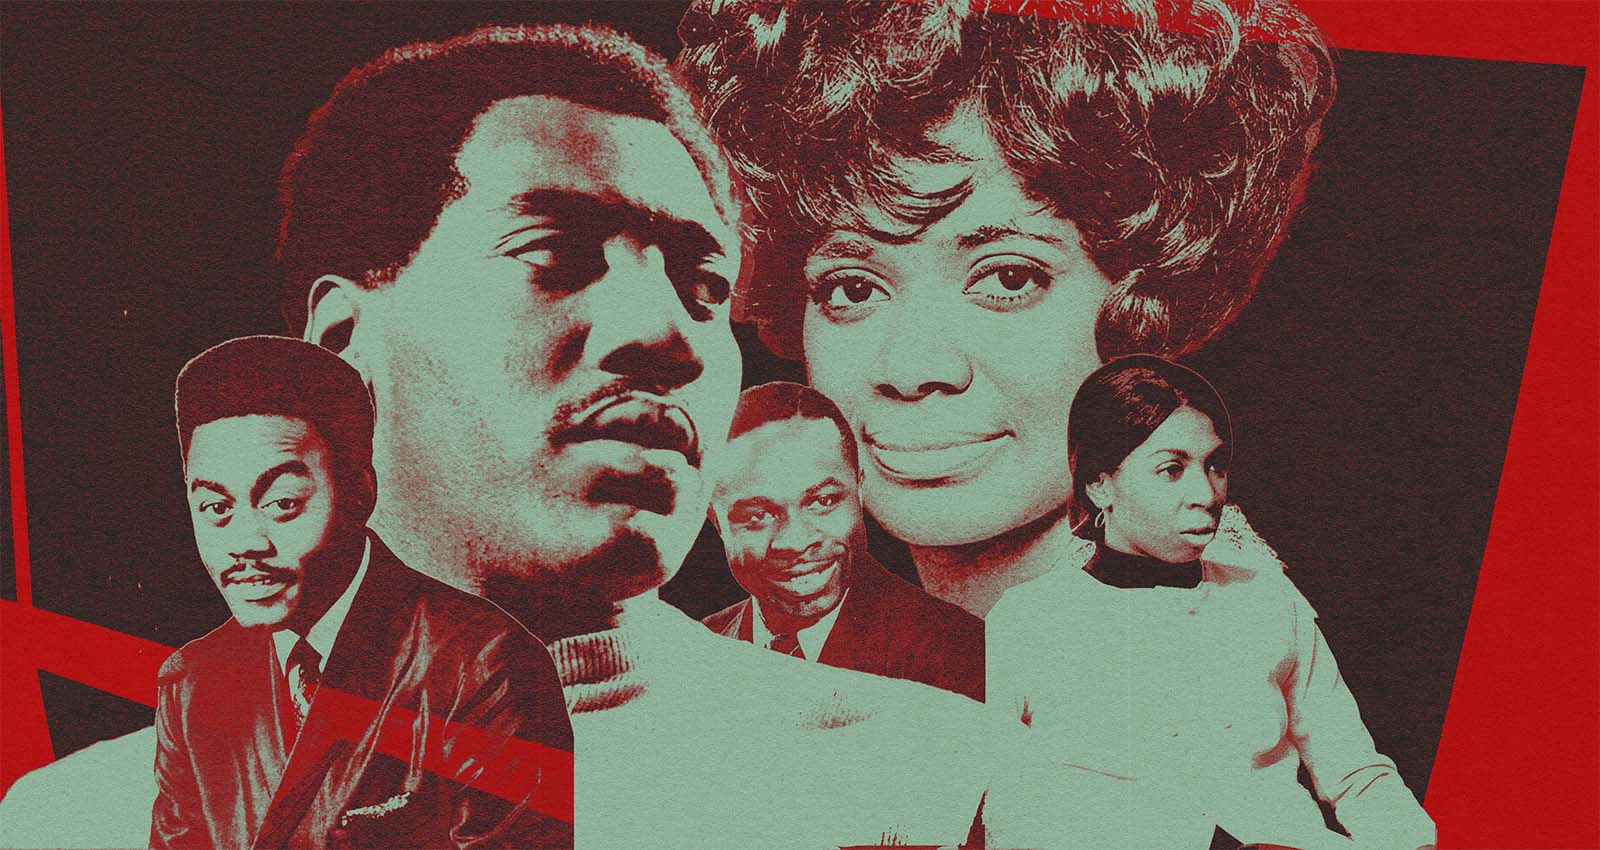 Digging Into the Classic Soul of Stax Records